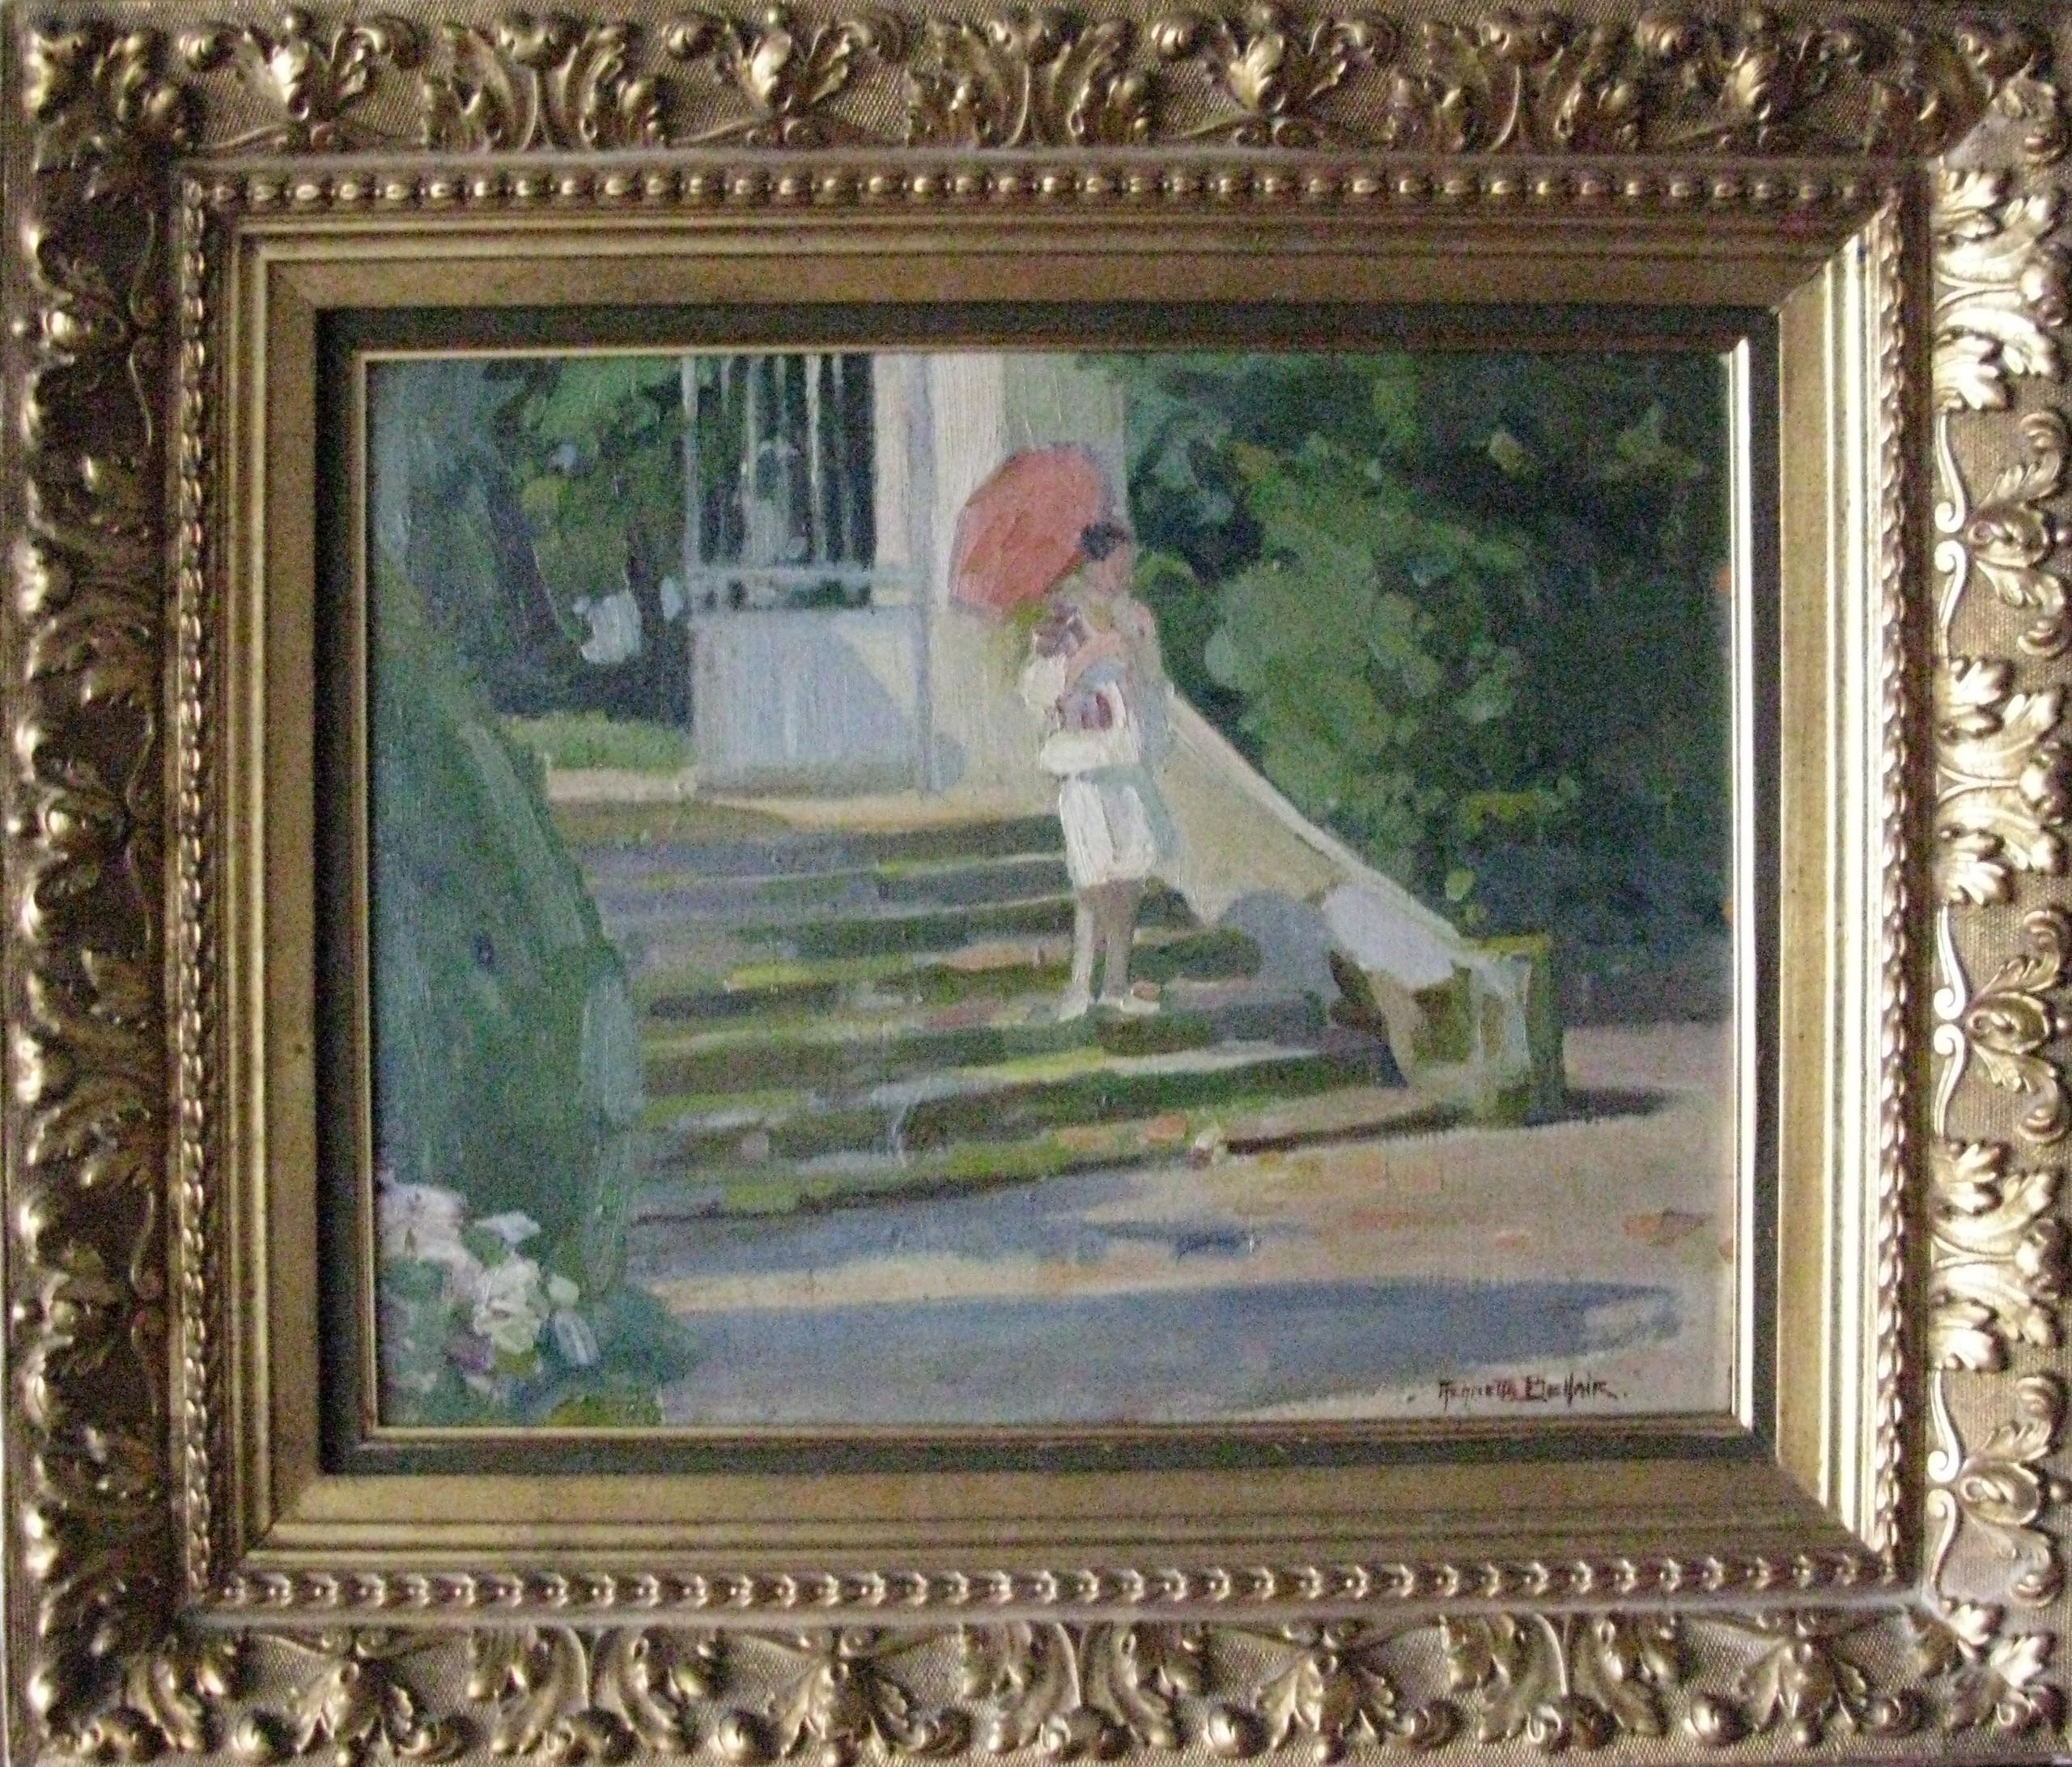 Henriette Bellair Landscape Painting - Figurative impressionist oil painting of a woman on steps with umbrella